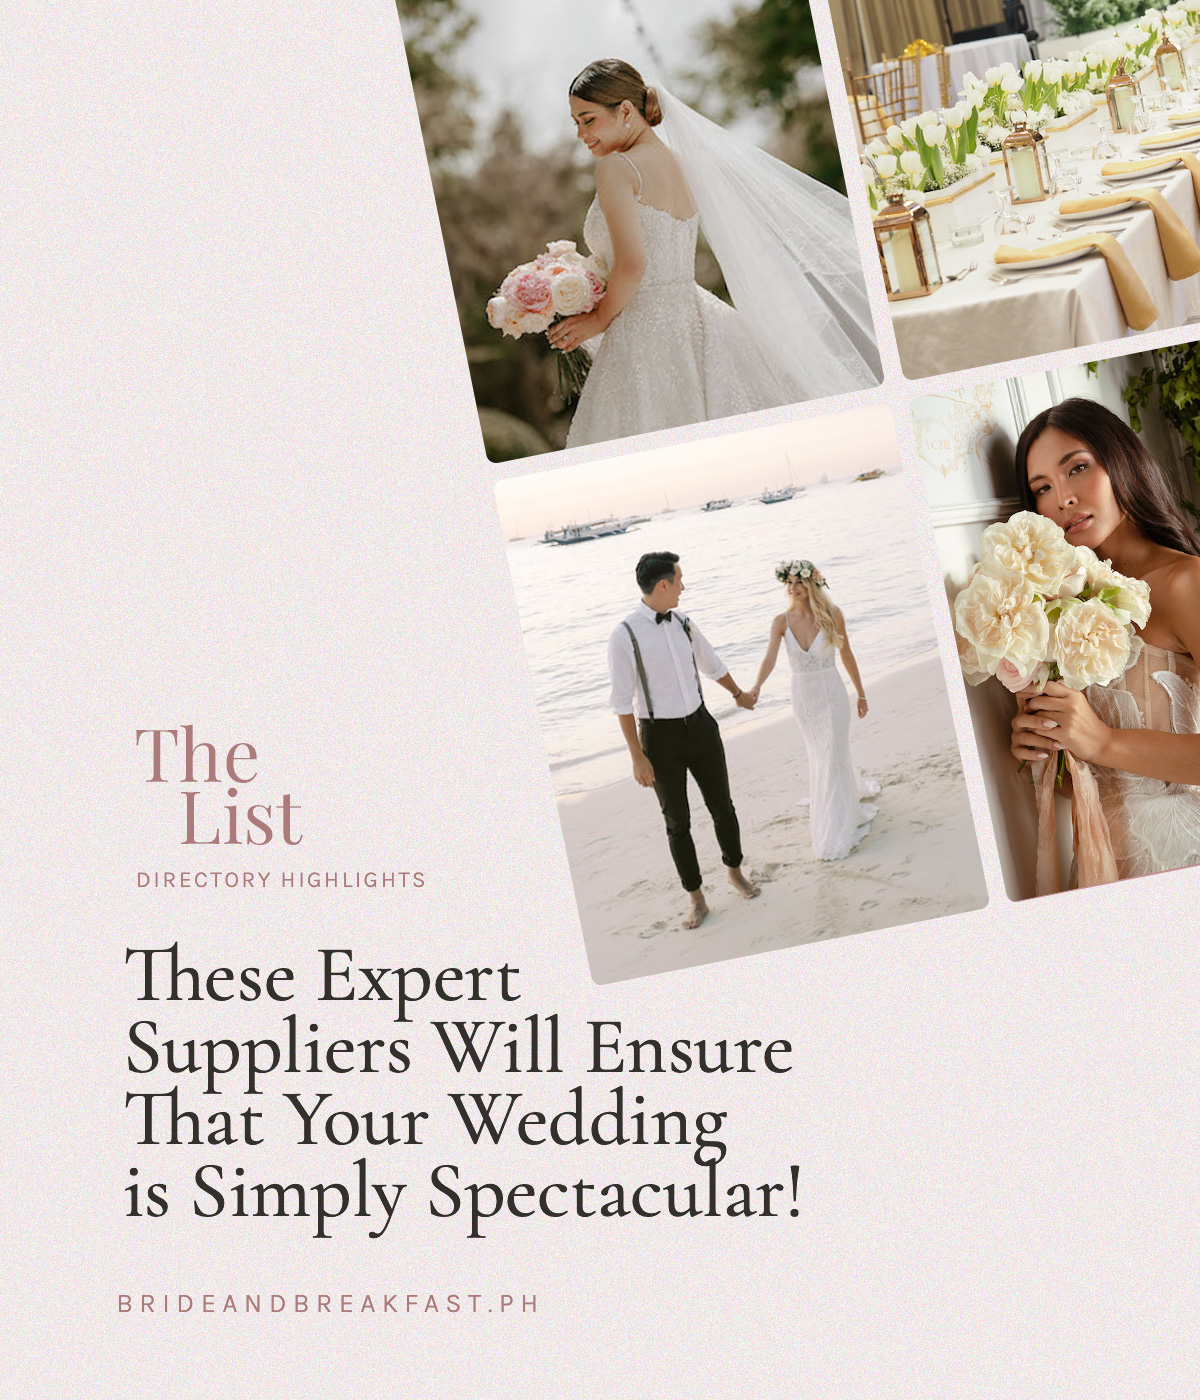 These Expert Suppliers Will Ensure That Your Wedding is Simply Spectacular